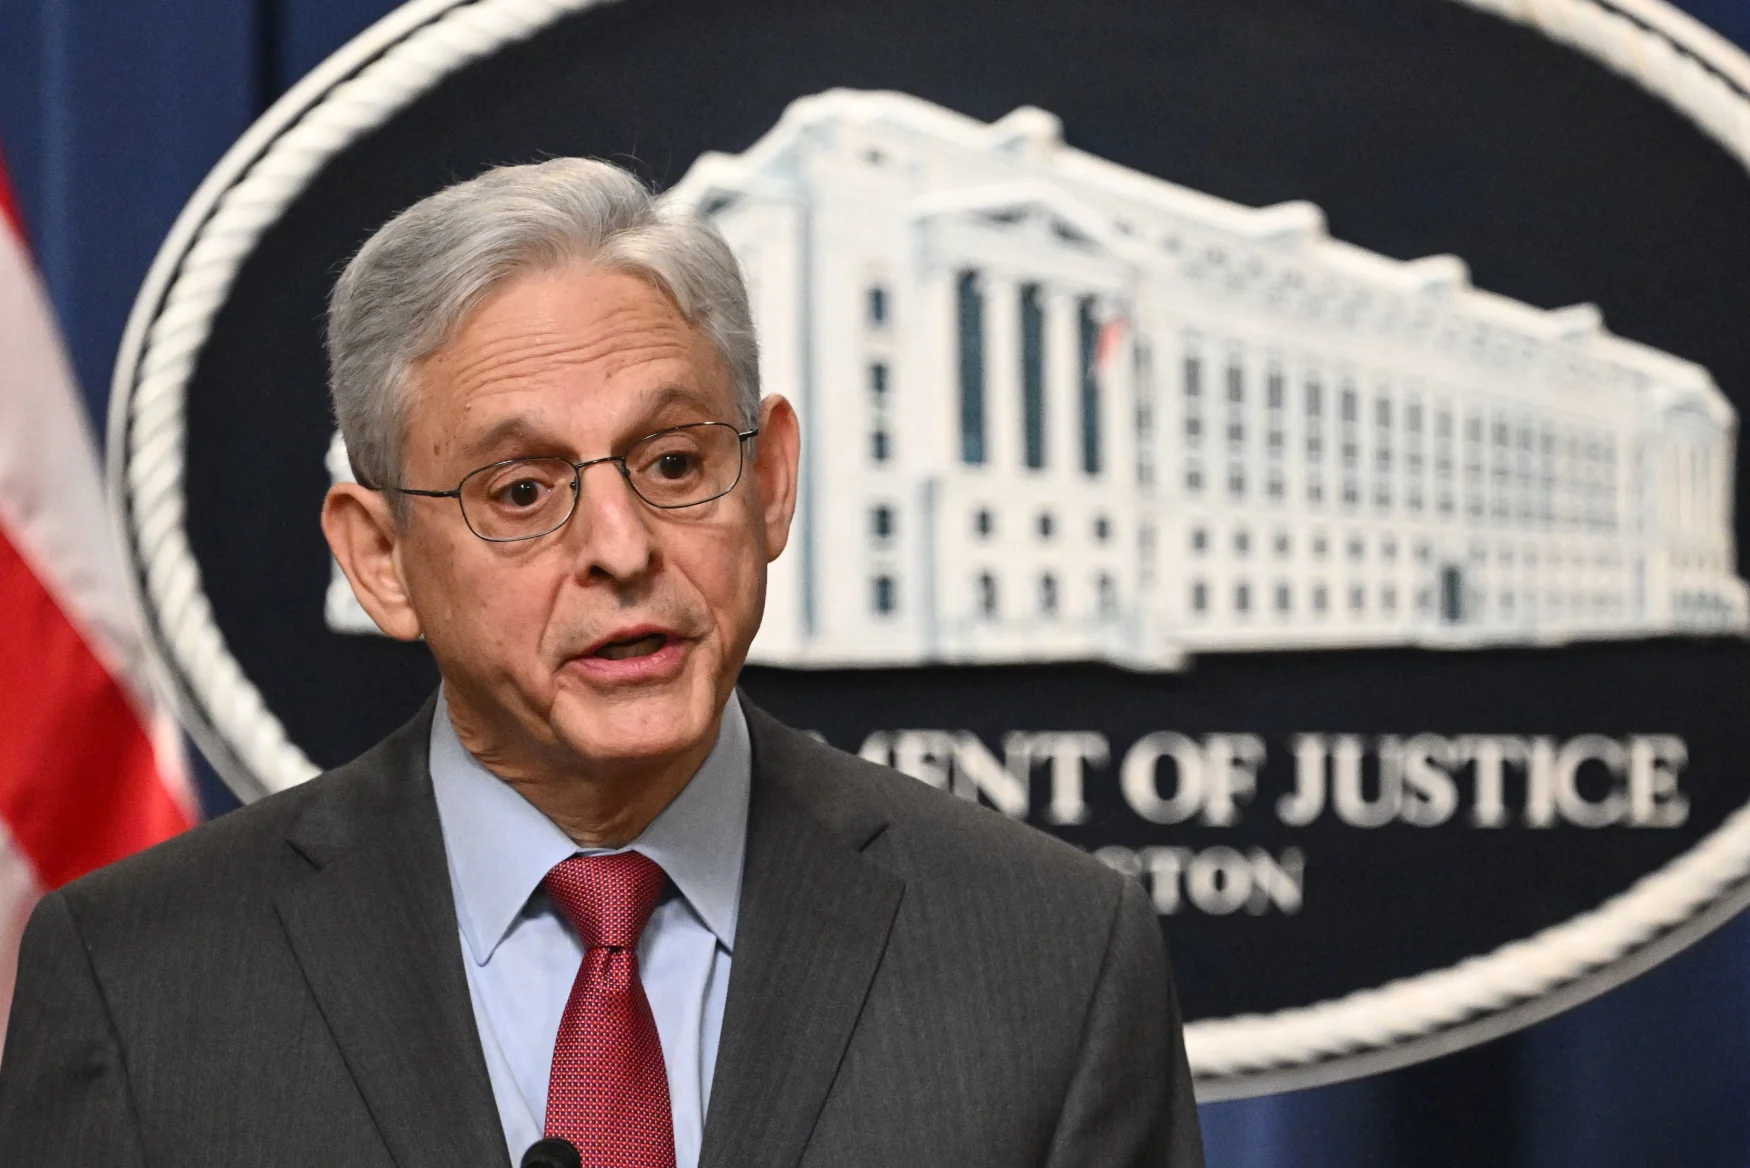 US Attorney General Merrick Garland speaks during a press conference to announce an international ransomware enforcement action, at the Justice Department in Washington, DC, on January 26, 2023. - The US Justice Department announced Thursday it had shut down the Hive ransomware operation, which had extorted more than $100 million from more than 1,500 victims worldwide. (Photo by Mandel NGAN / AFP) (Photo by MANDEL NGAN/AFP via Getty Images)